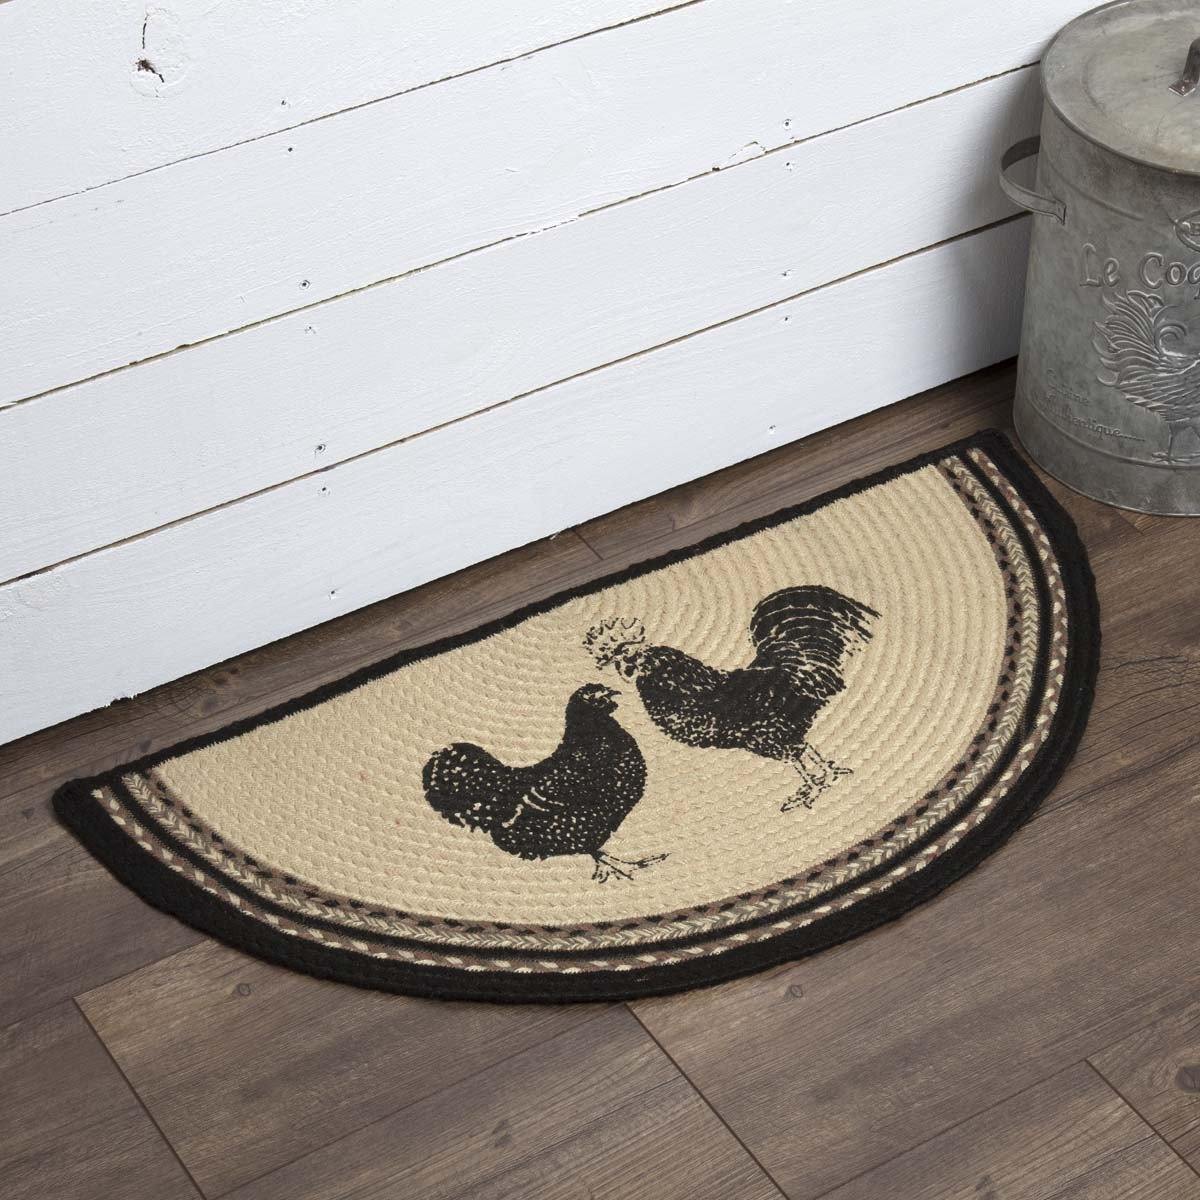 Sawyer Mill Charcoal Poultry Jute Braided Rug Half Circle 16.5"x33" VHC Brands - The Fox Decor